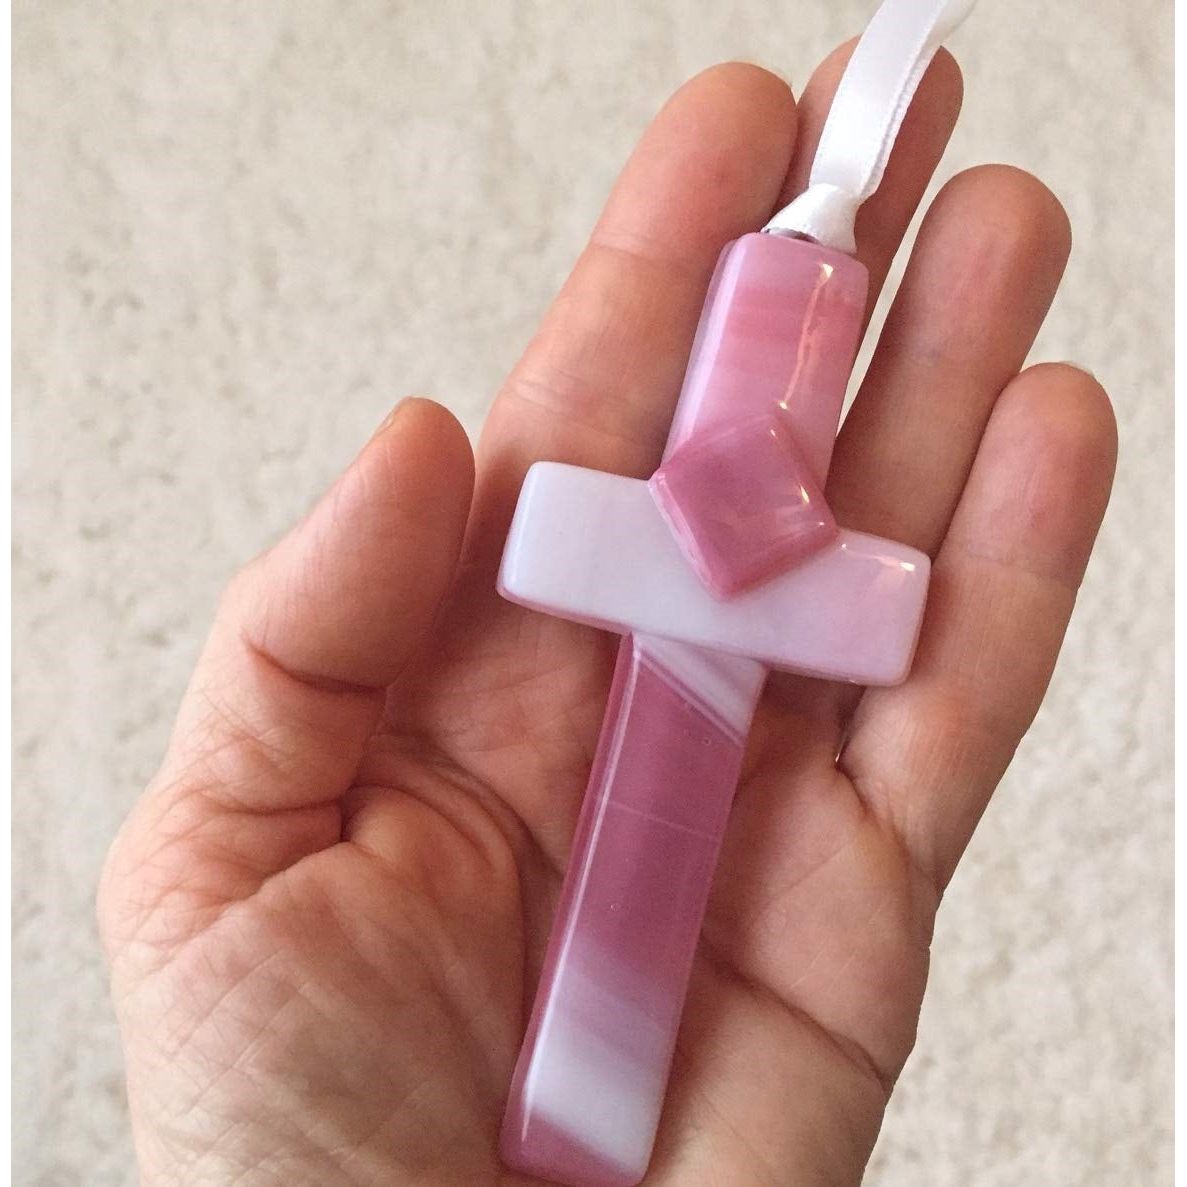 Pink glass cross being held in a hand.